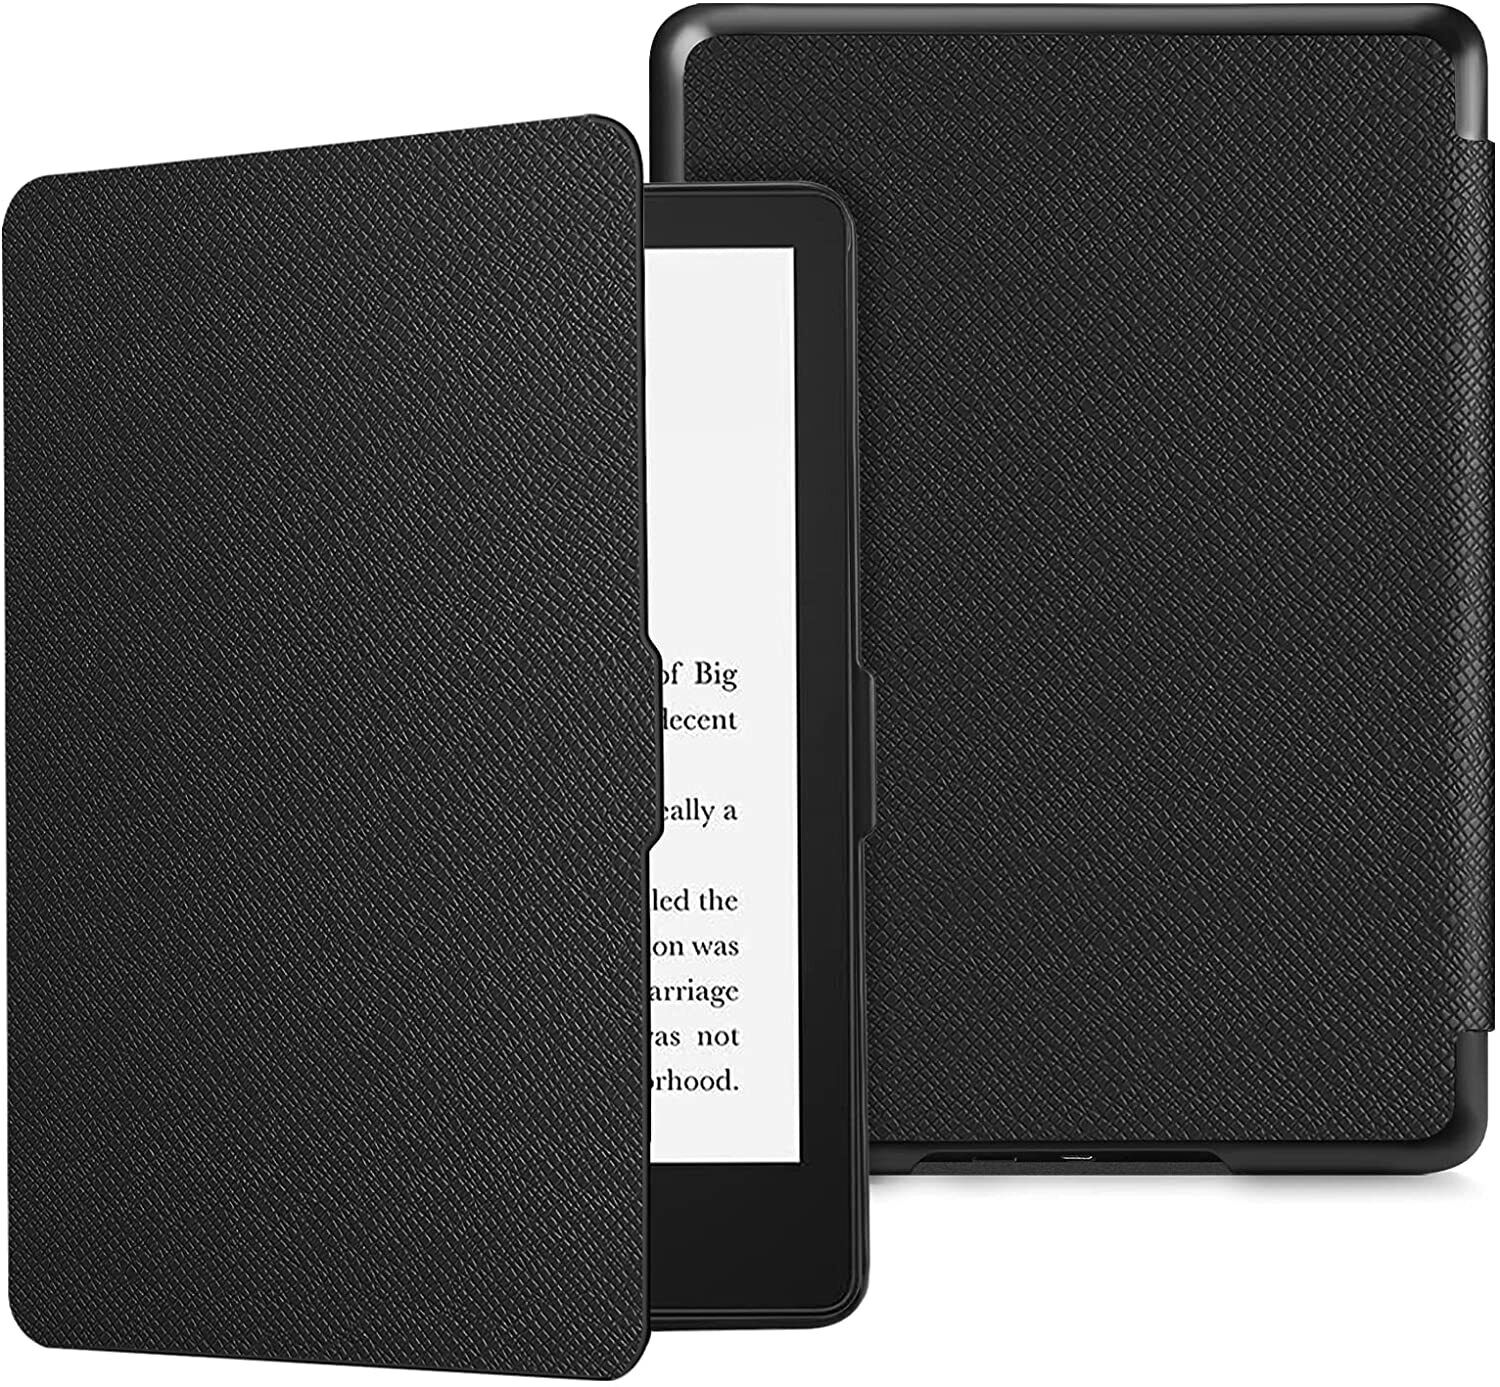 Slimshell Case for Amazon Kindle Paperwhite 11th Gen 2021 6.8'' PU Leather Cover